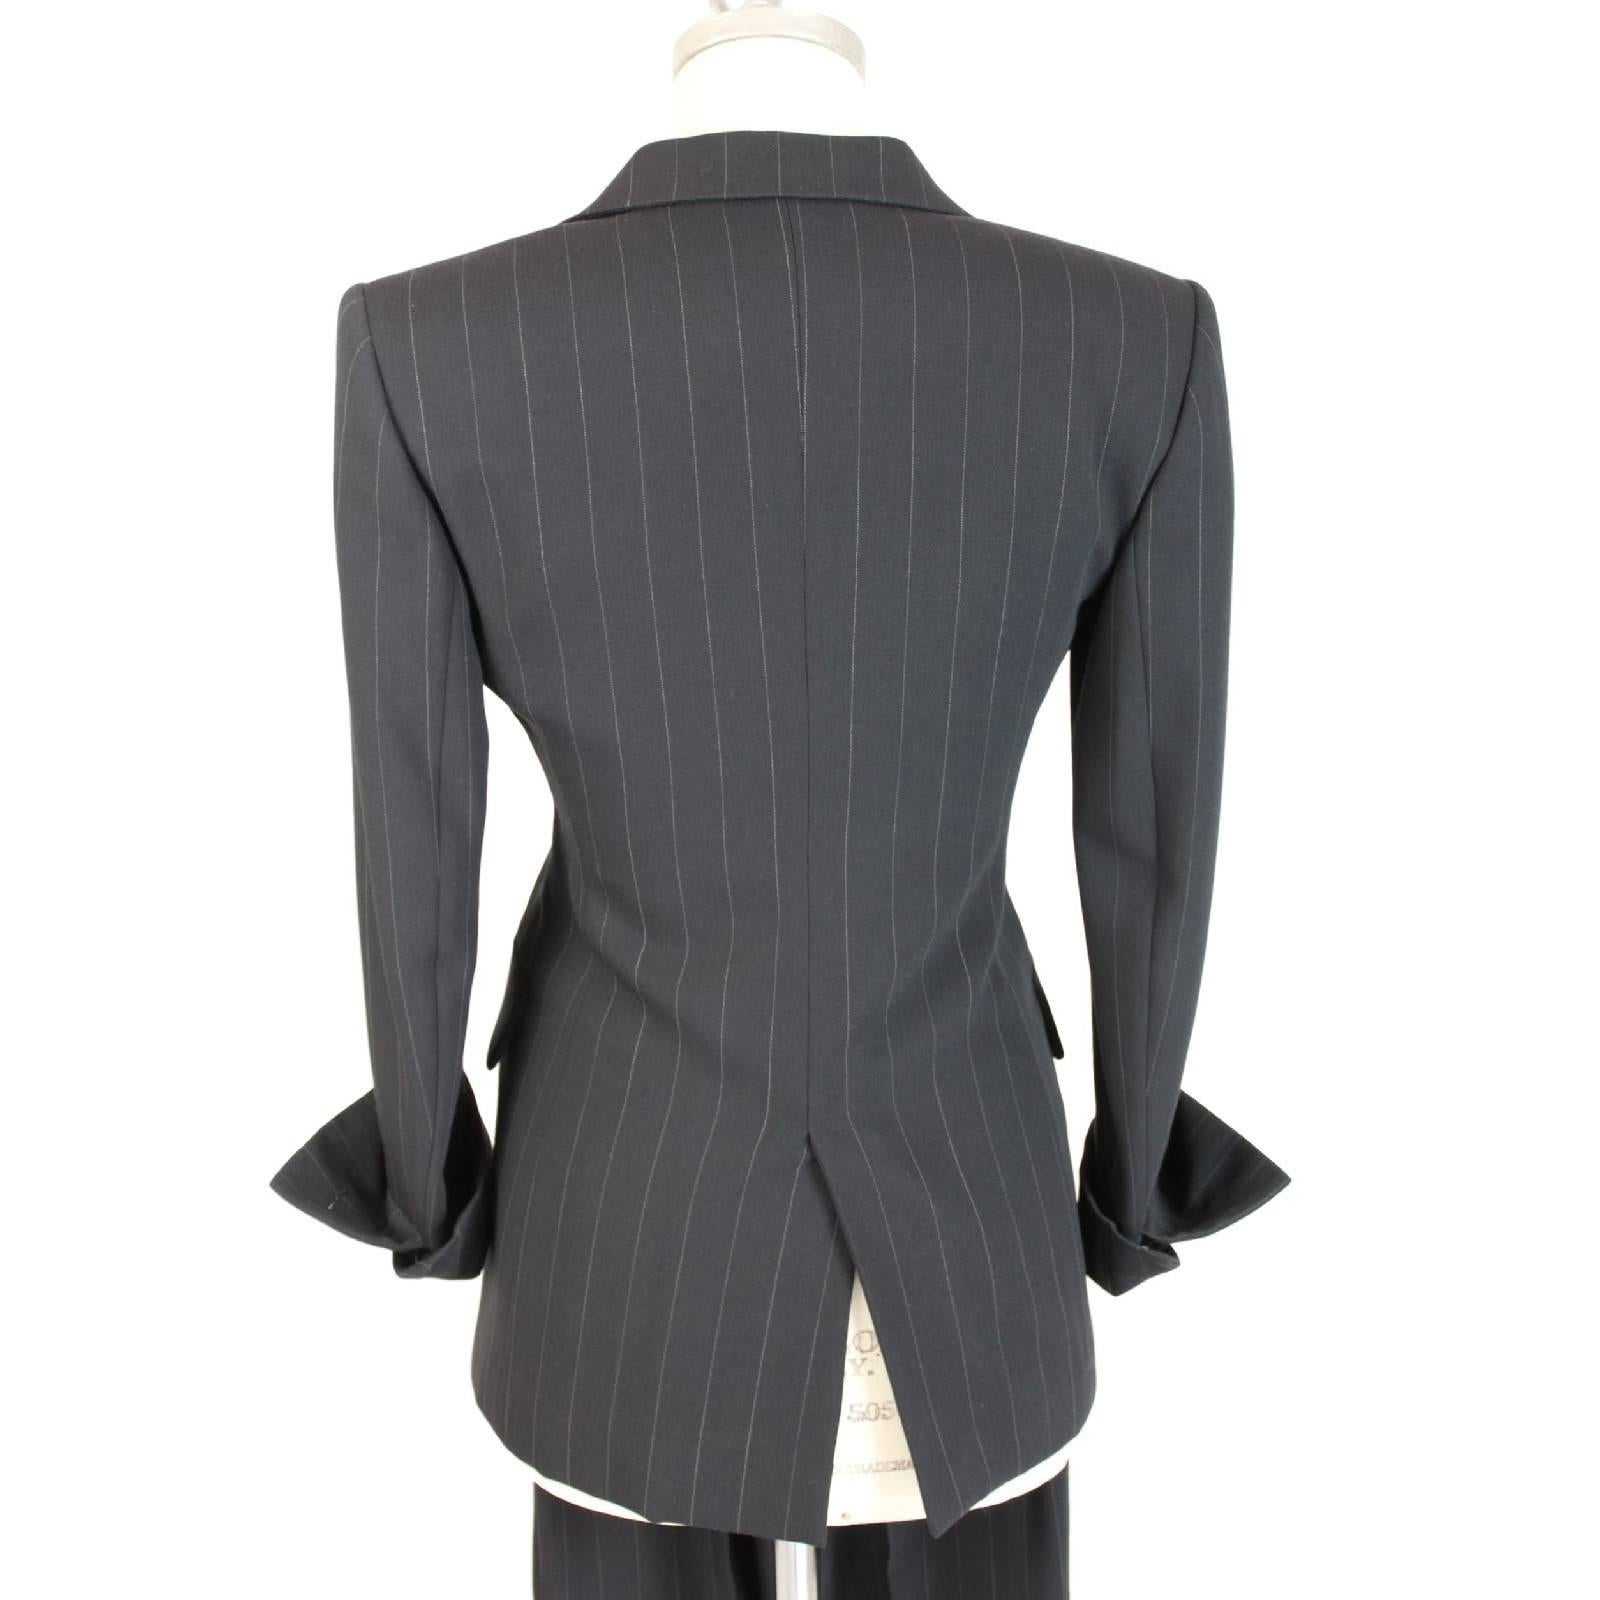 1990s Prada Gray Pinstripe Wool Jacket Suit Pants Size 40 Made Italy Women's  In Excellent Condition For Sale In Brindisi, IT